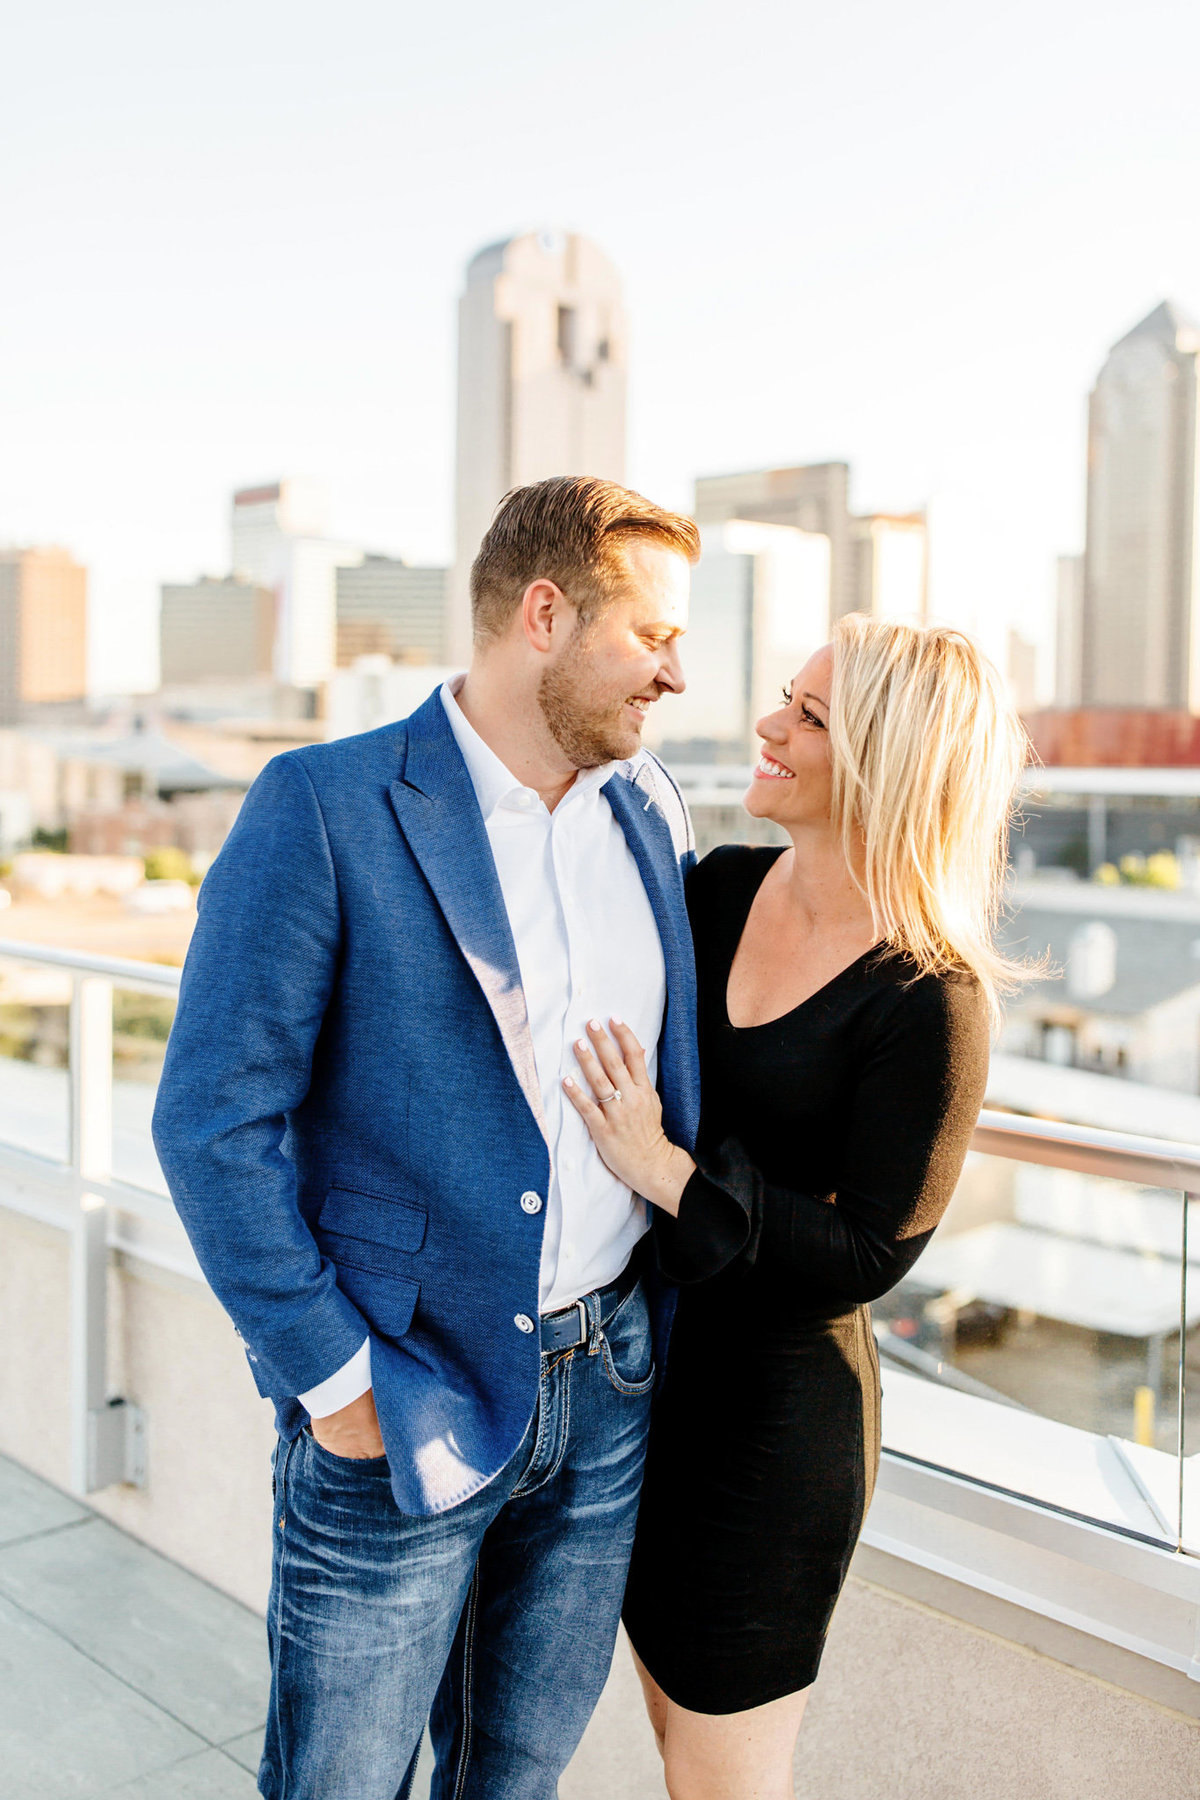 Eric & Megan - Downtown Dallas Rooftop Proposal & Engagement Session-63